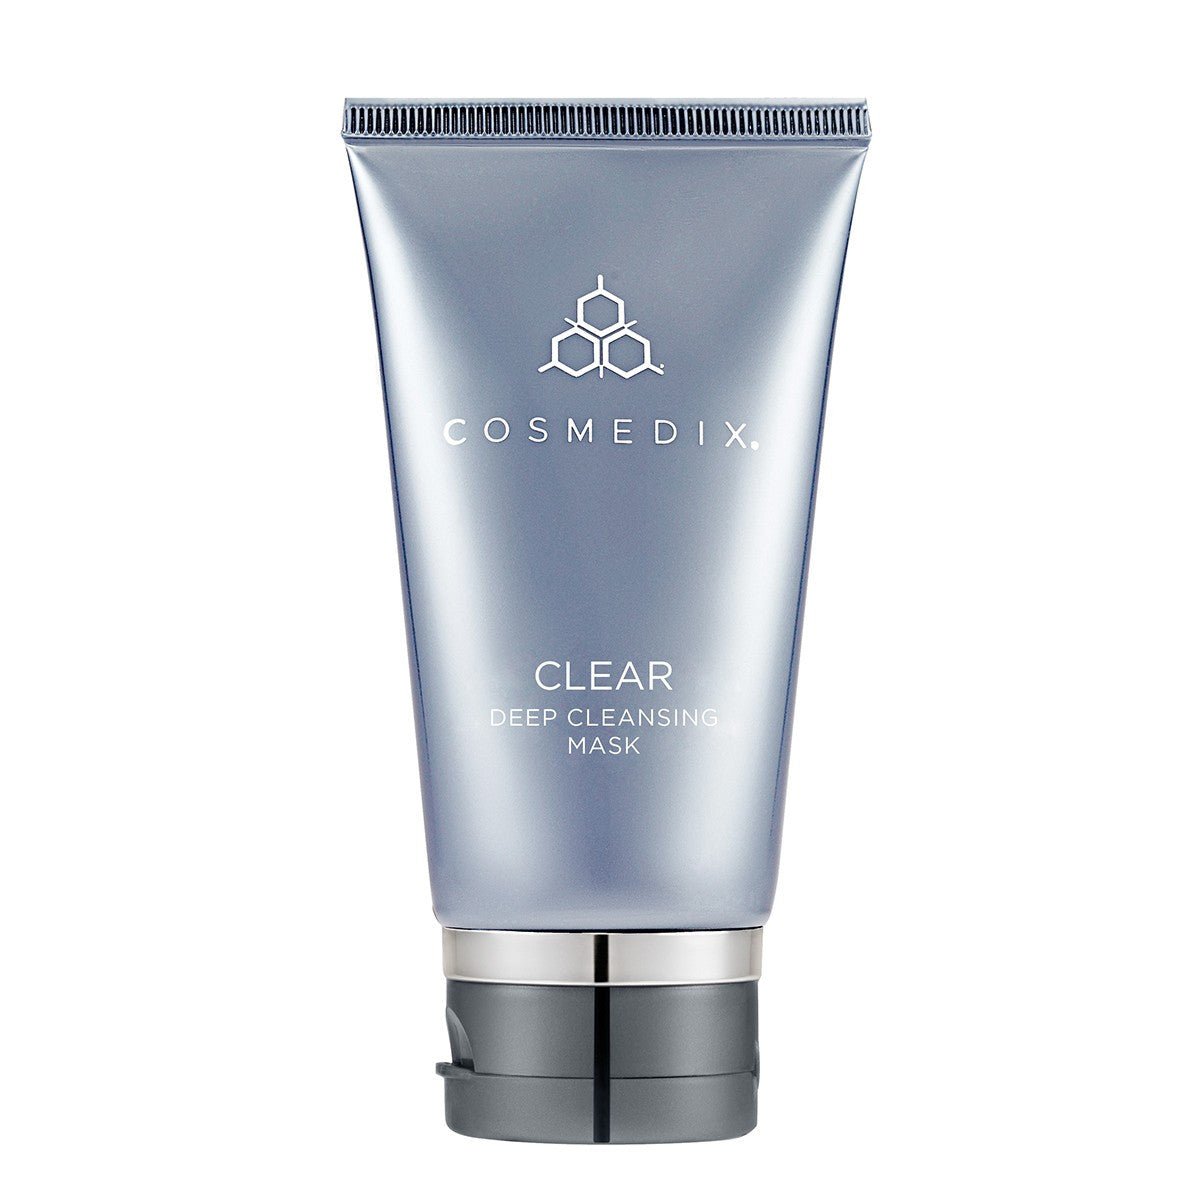 COSMEDIX CLEAR Mask 60G - Exquisite Laser Clinic